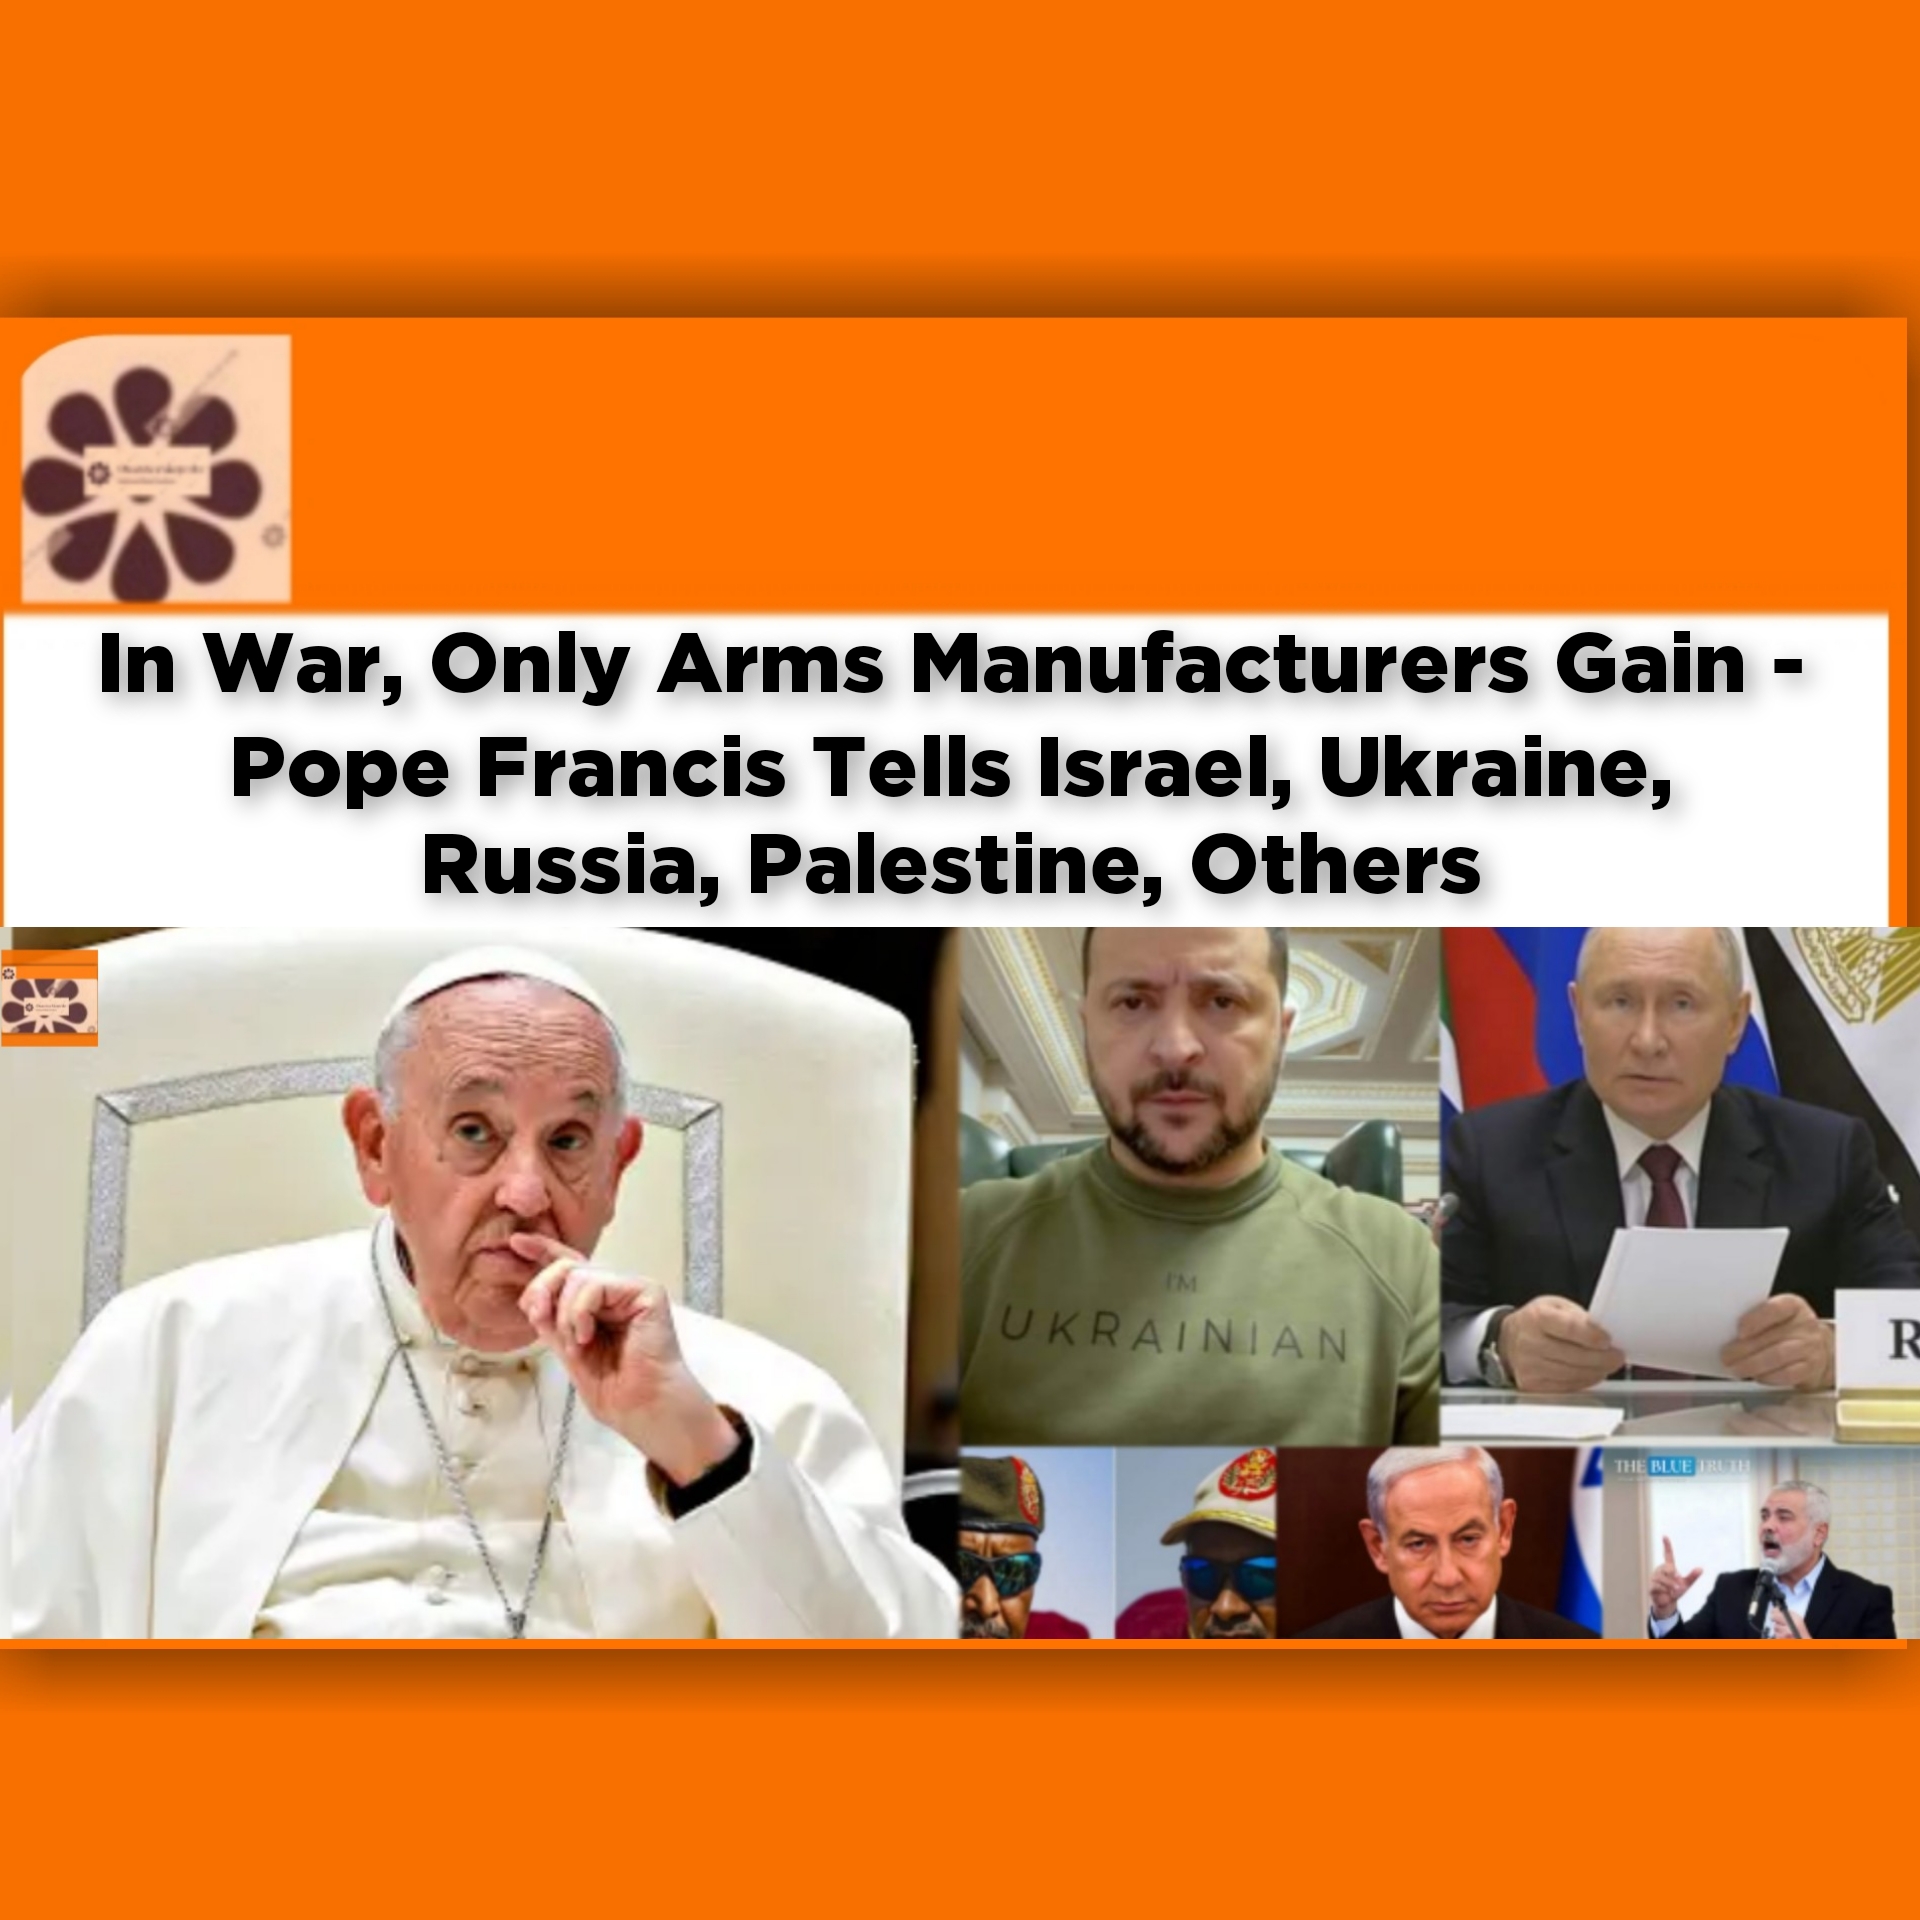 In War, Only Arms Manufacturers Gain - Pope Francis Tells Israel, Ukraine, Russia, Palestine, Others ~ OsazuwaAkonedo #ArmsManufacturers #Benjamin #Gaza #Israel #Palestine #Peace #PopeFrancis #PrayTogether #Putin #Russia #Sudan #Ukraine #Volodymyr OsazuwaAkonedo,Information,Editorial Policy